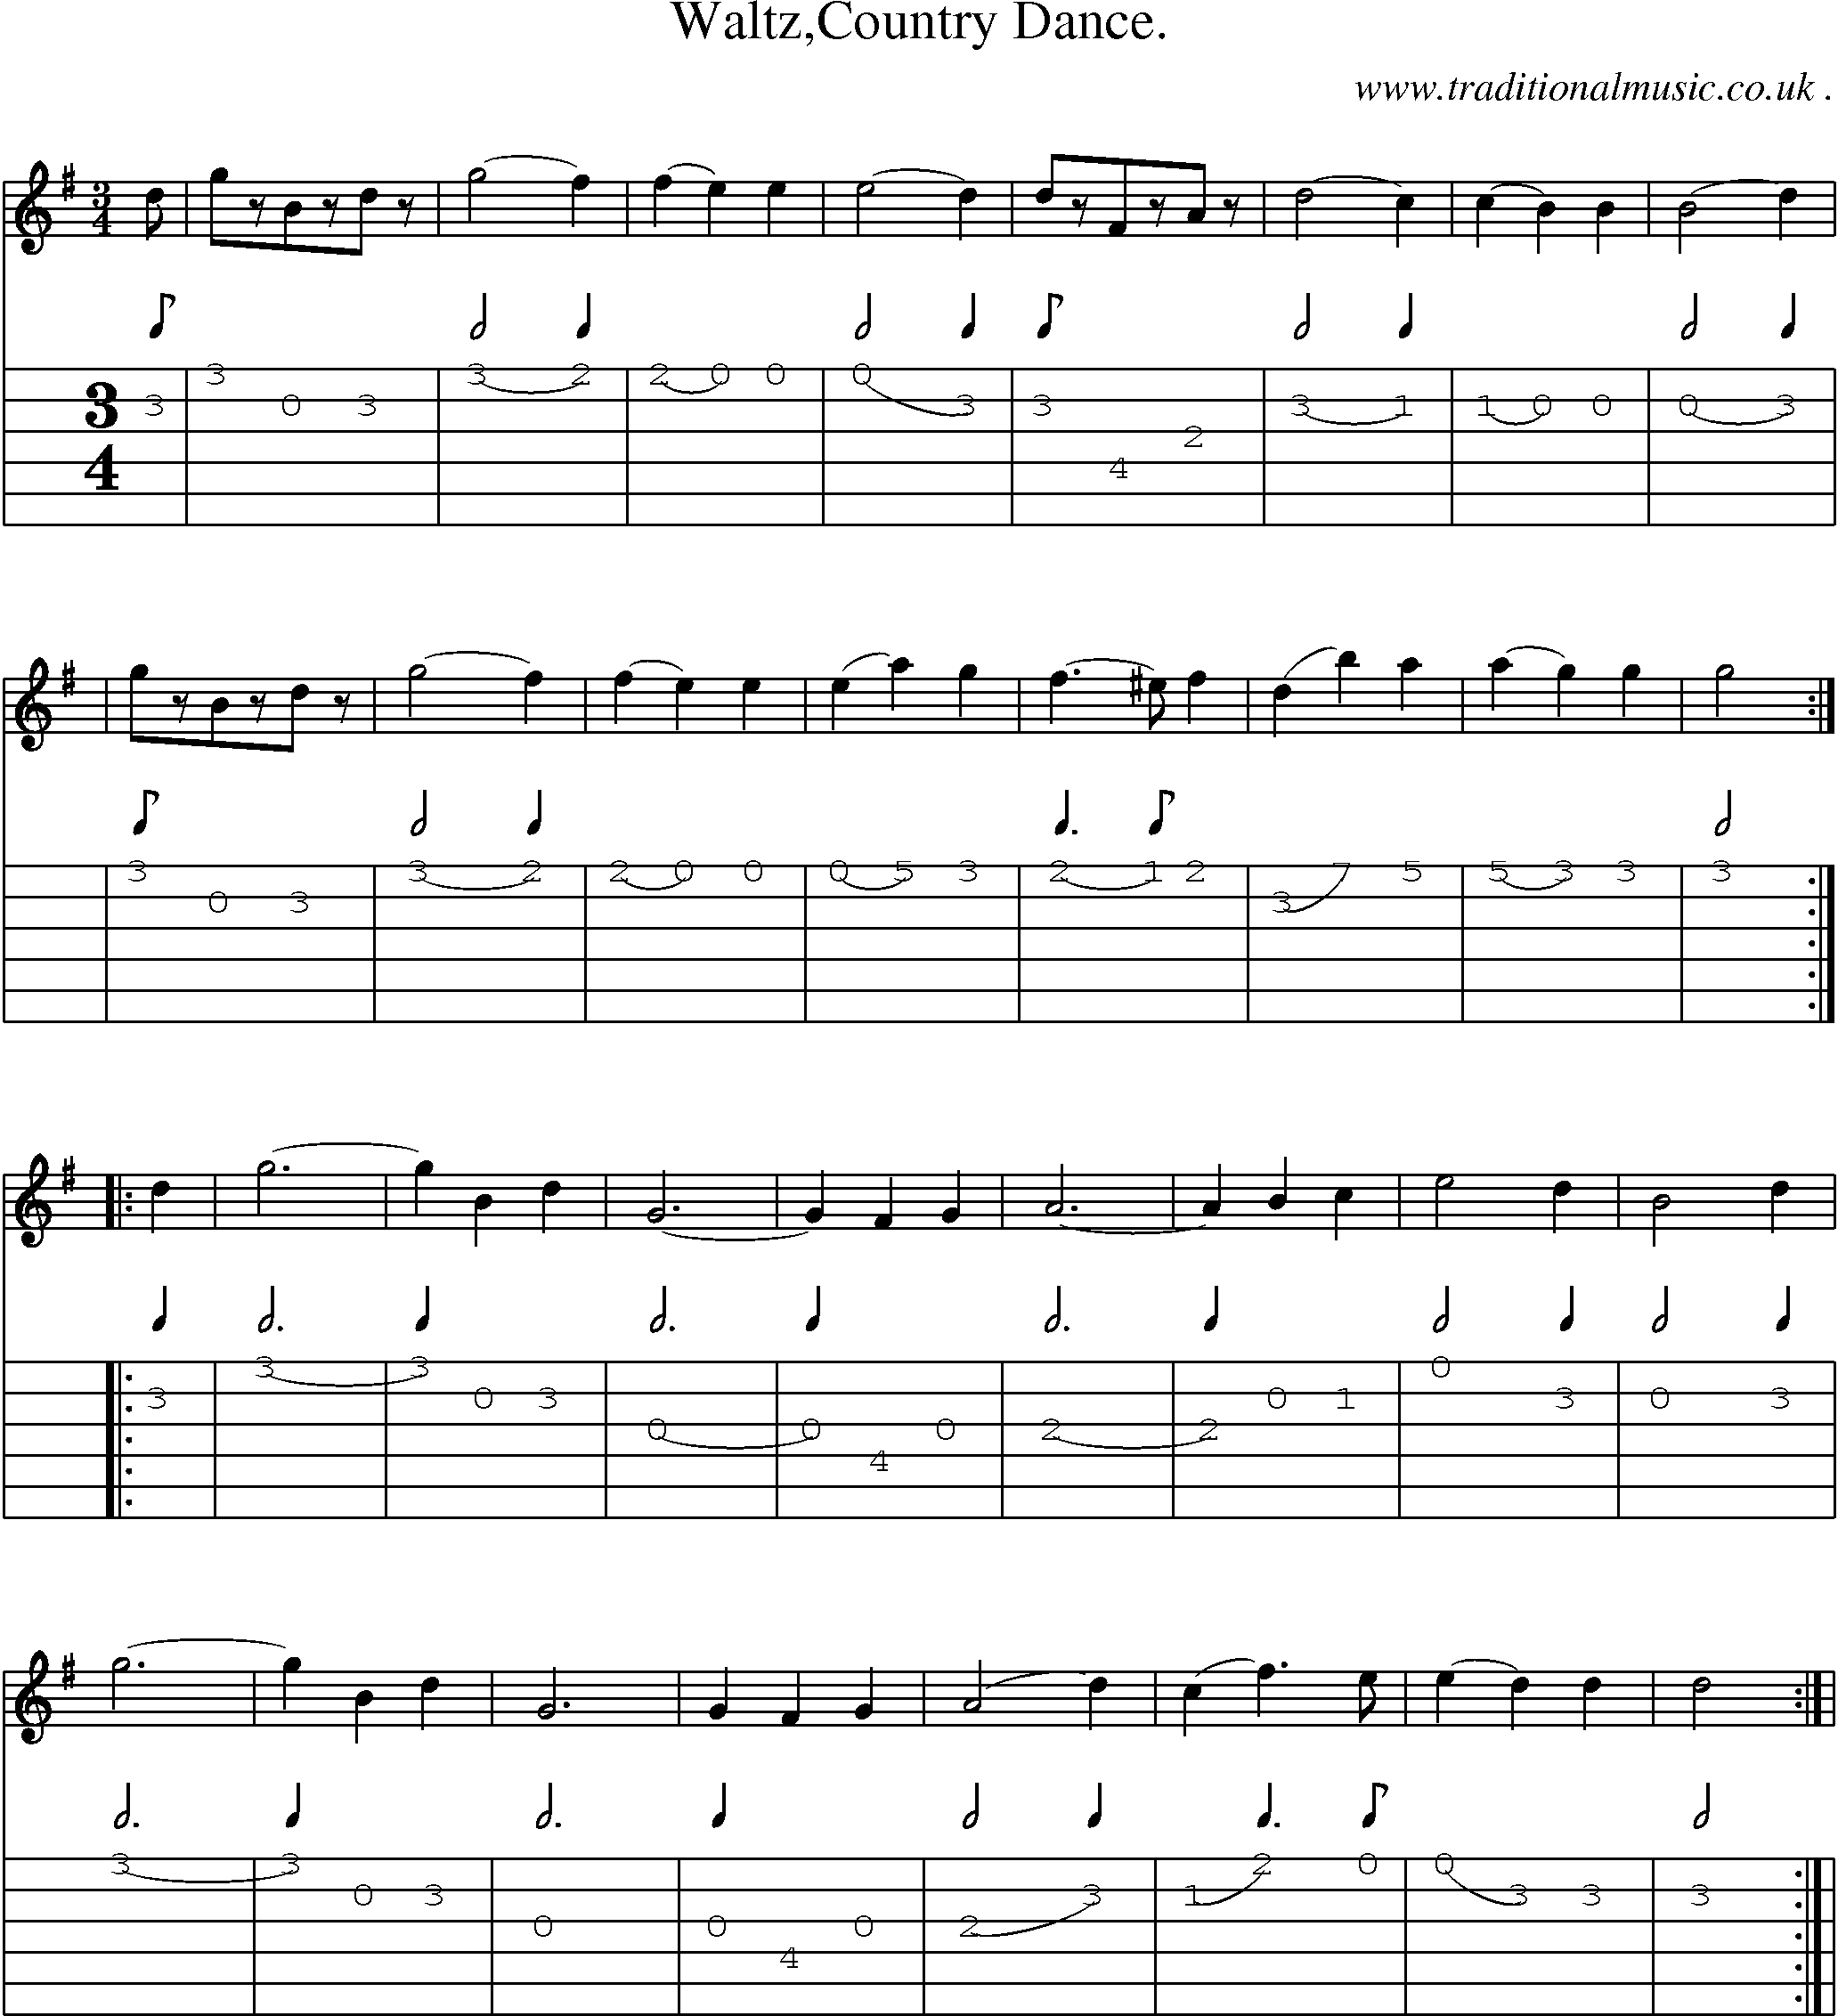 Sheet-Music and Guitar Tabs for Waltzcountry Dance